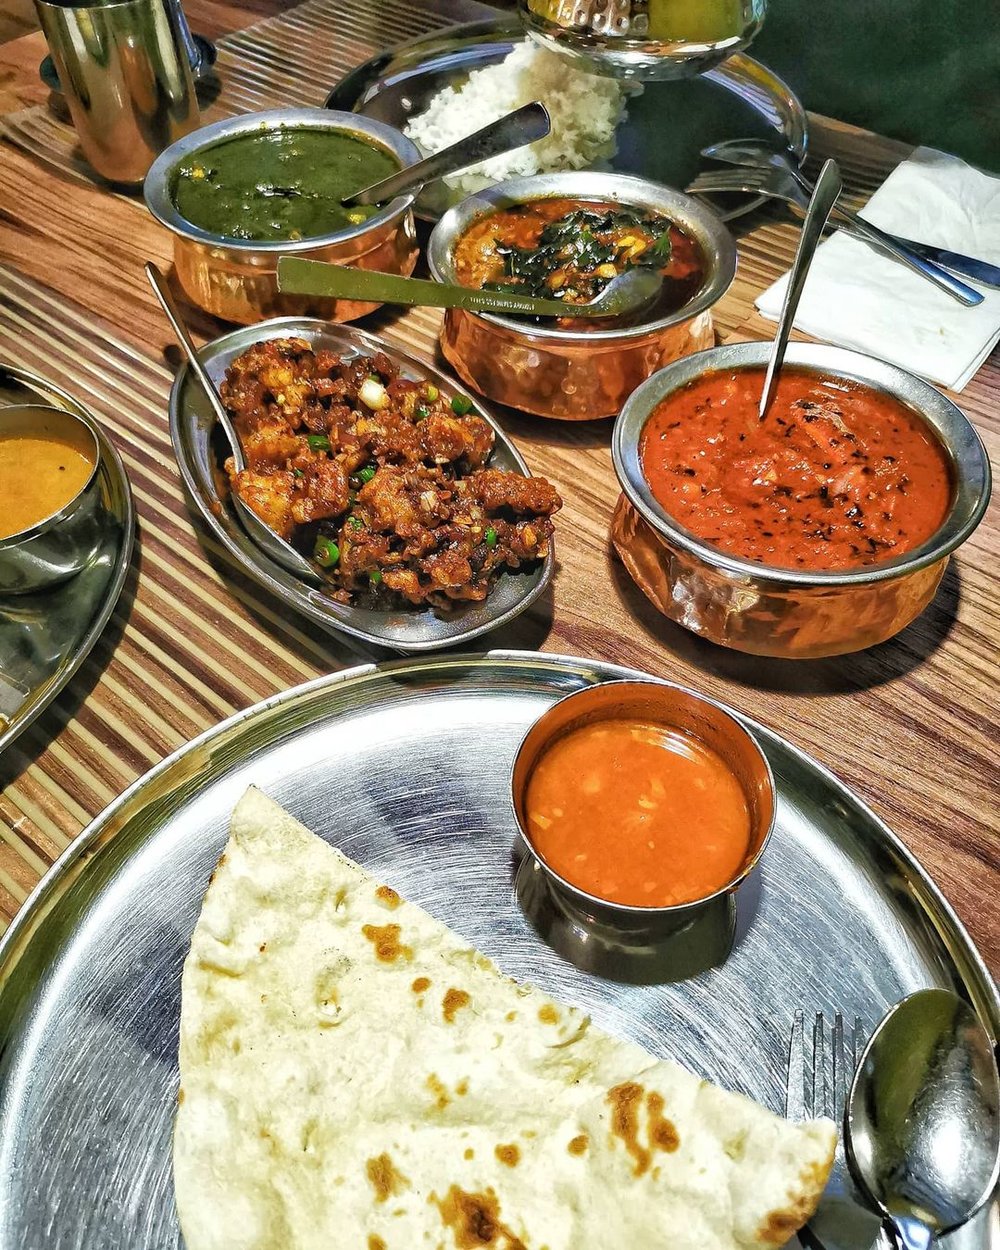 10 Best Indian Restaurants In KL 2021: Indulge In The Yummiest Indian ...